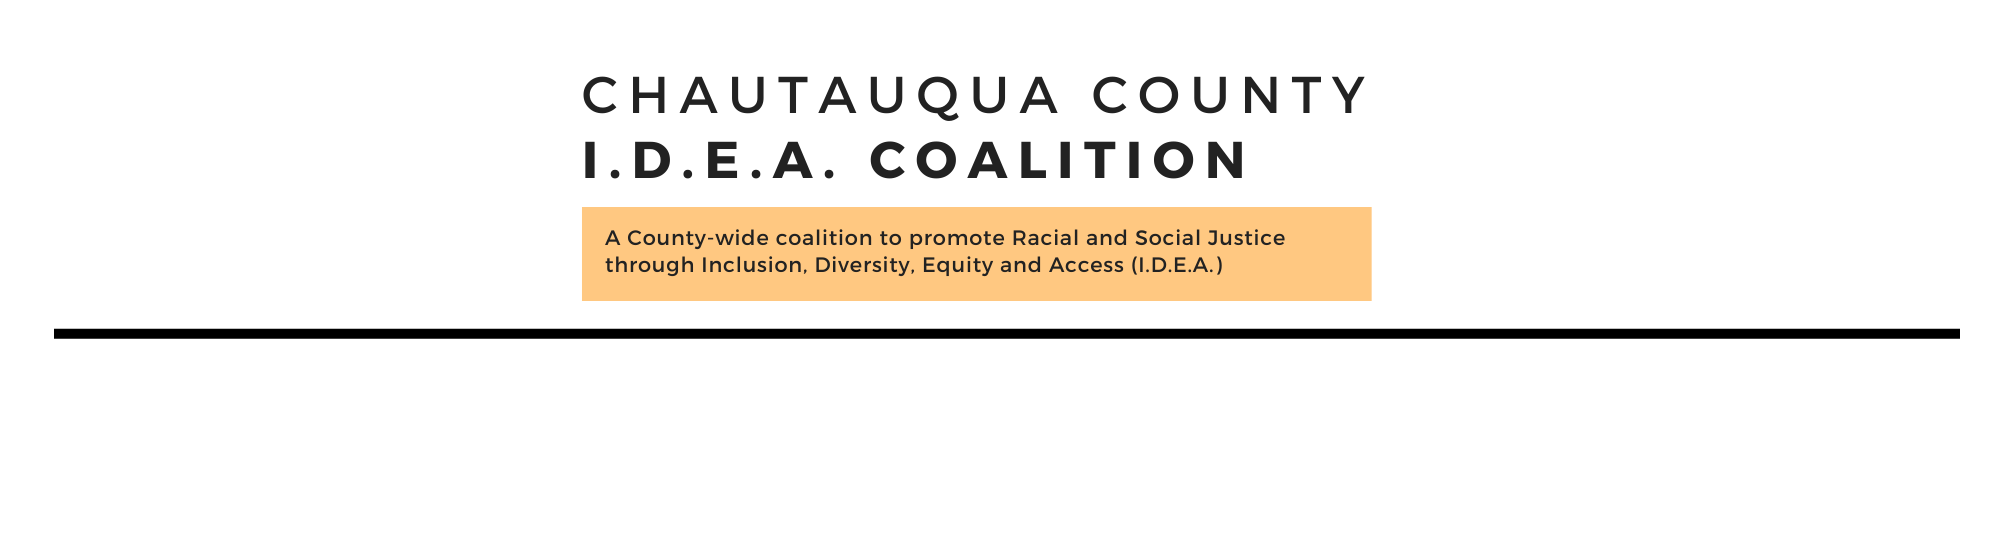 Chautauqua County I.D.E.A. Coalition: A County-wide coalition to promote Racial and Social Justice through Inclusion, Diversity, Equity and Access (I.D.E.A.)